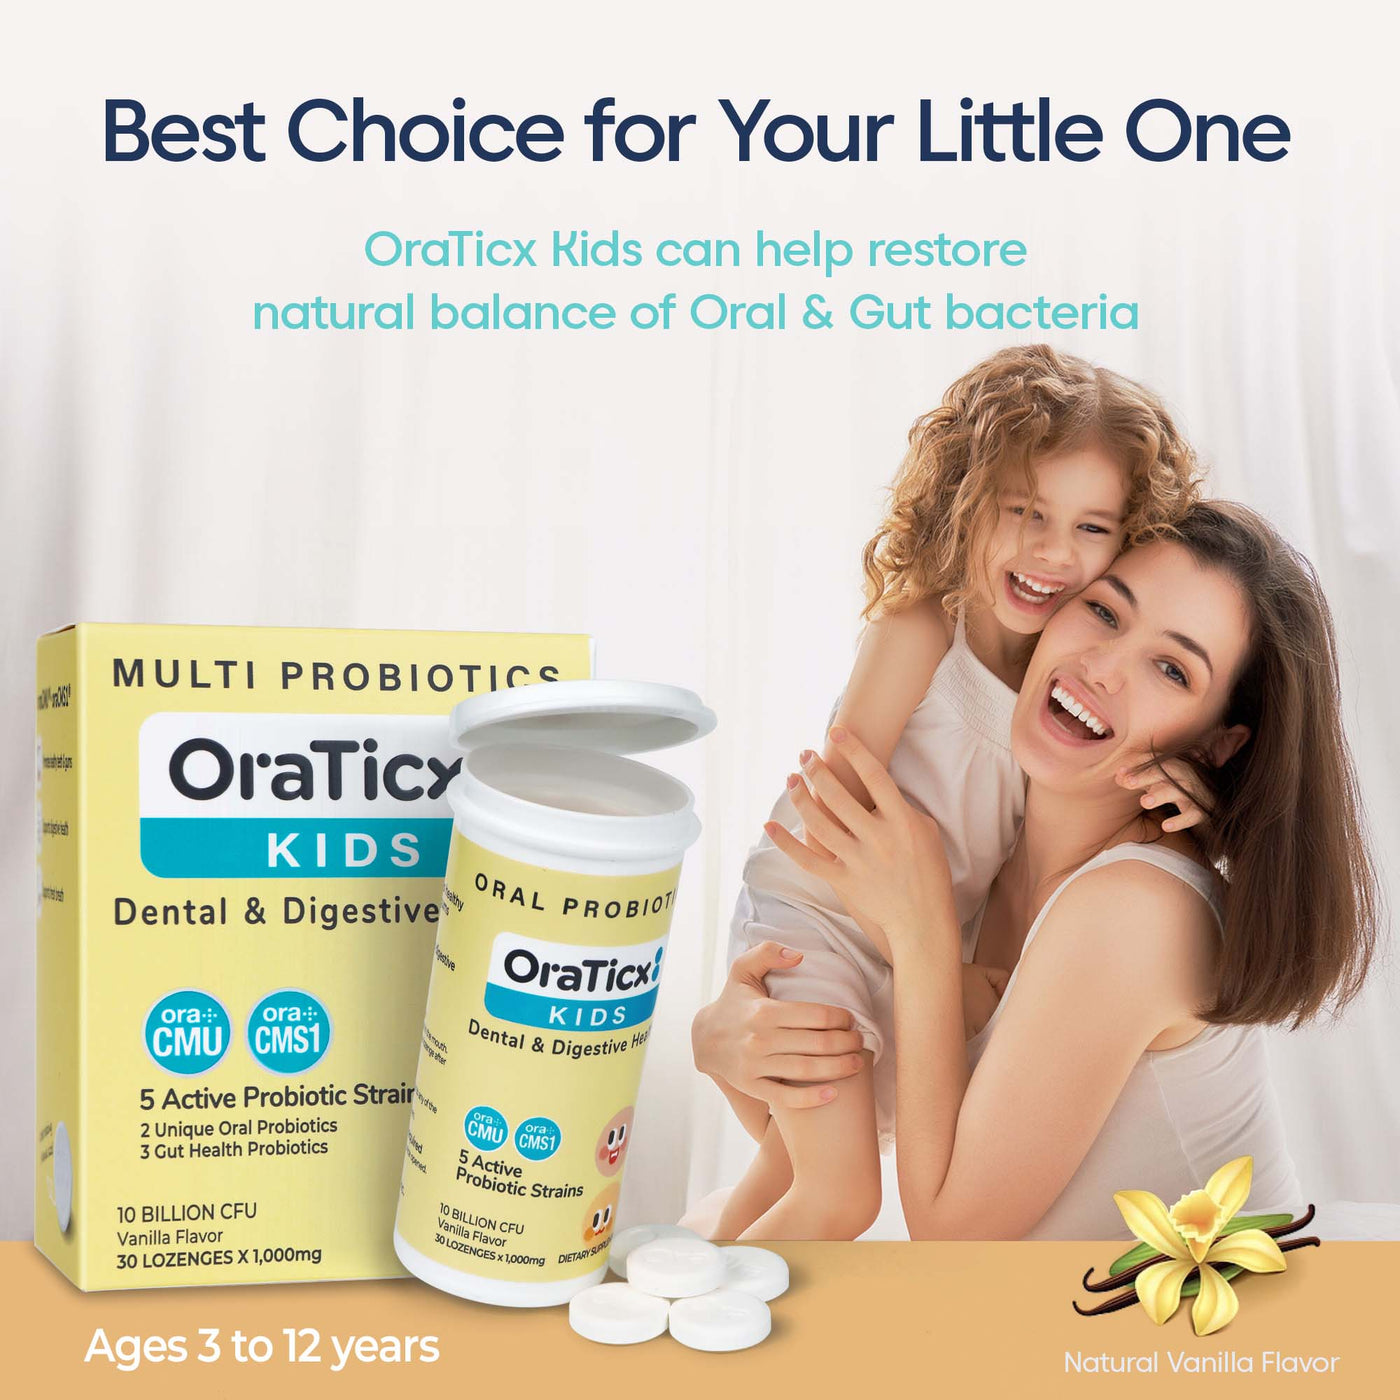 OraTicx kids can help restore natural balance of oral & gut bacteria